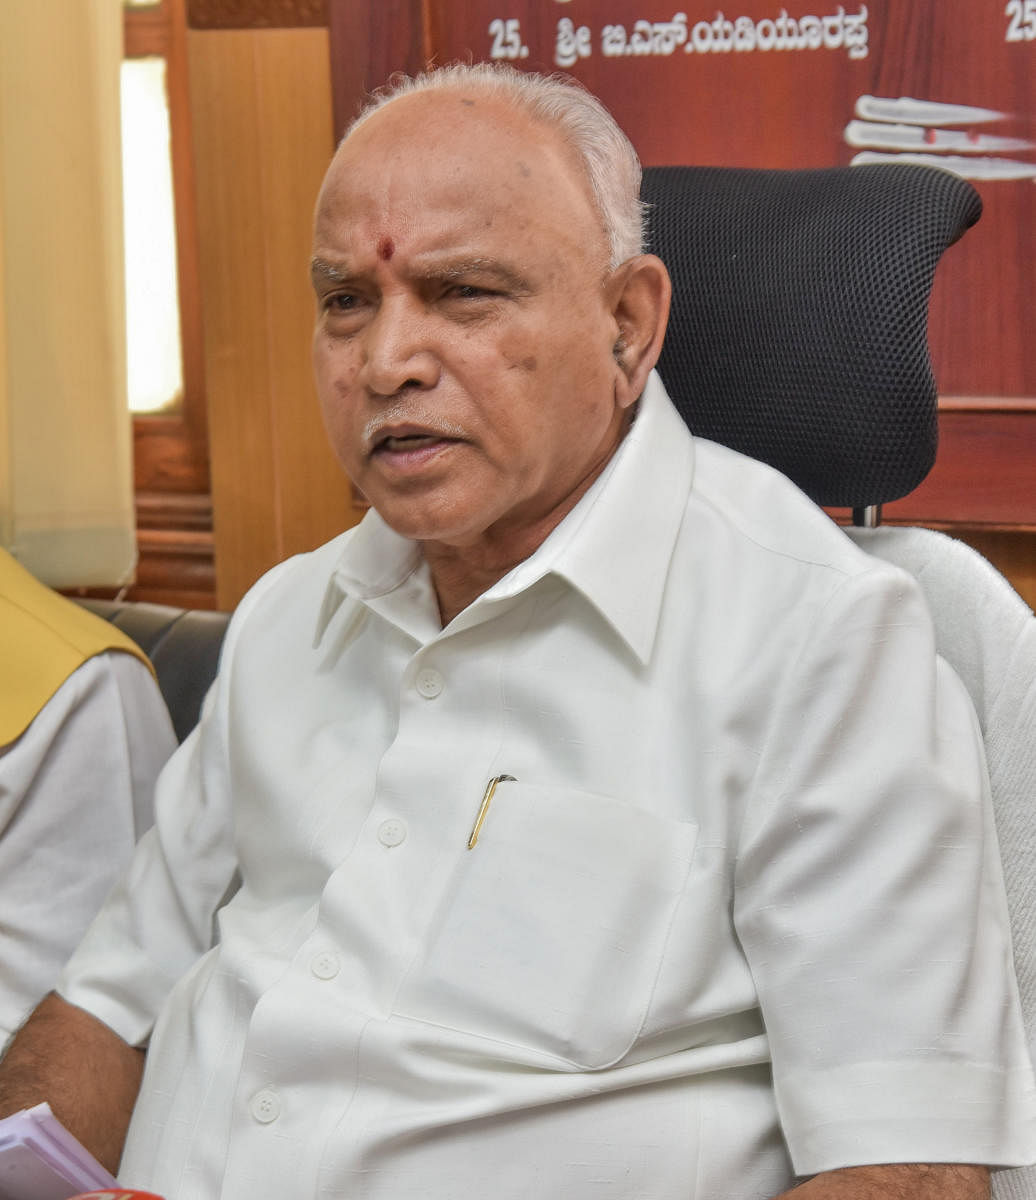 The KMF on Thursday requested Chief Minister B S Yediyurappa to increase the subsidy given to the farmers by Re 1 in the upcoming budget. (DH Photo)